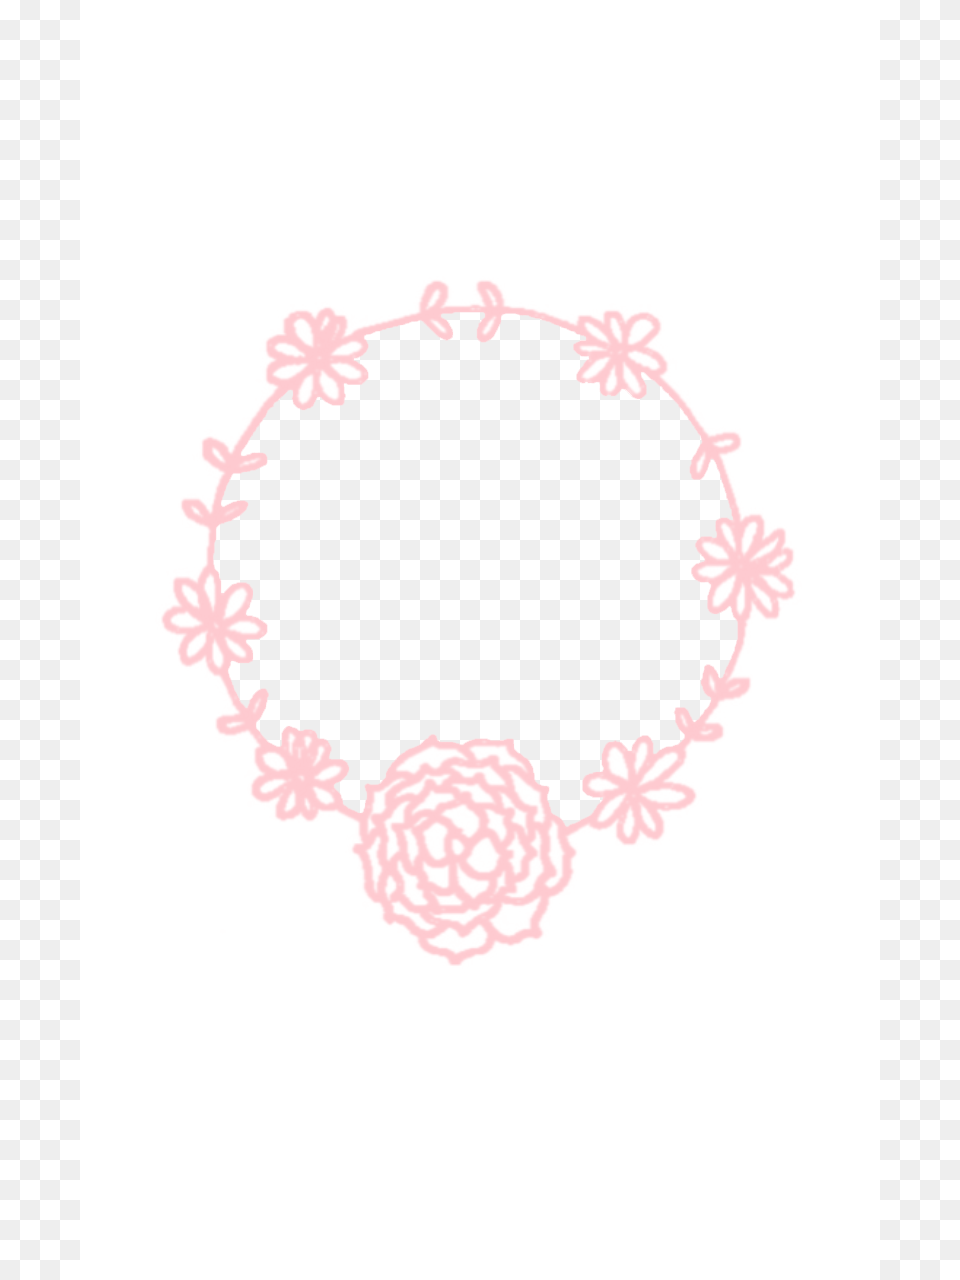 Minimal Pink White Floral Wreath Iphone Background Wreath, Accessories, Jewelry, Necklace, Pattern Png